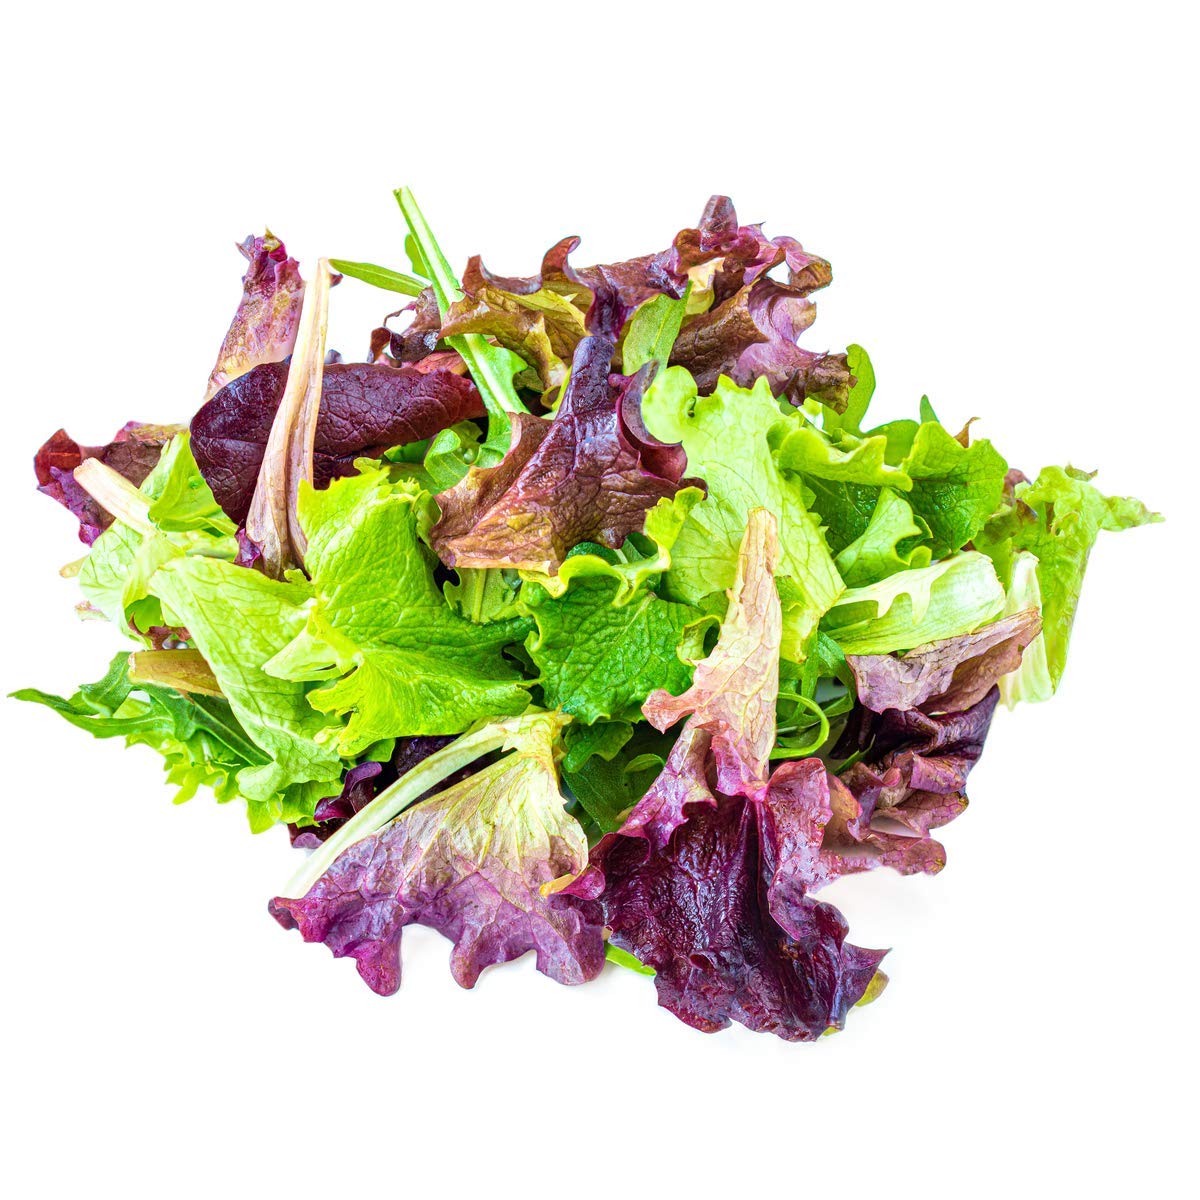 Salad Plants - Lettuce 'Mixed Selection' - 12 x Full Plant Pack - AcquaGarden